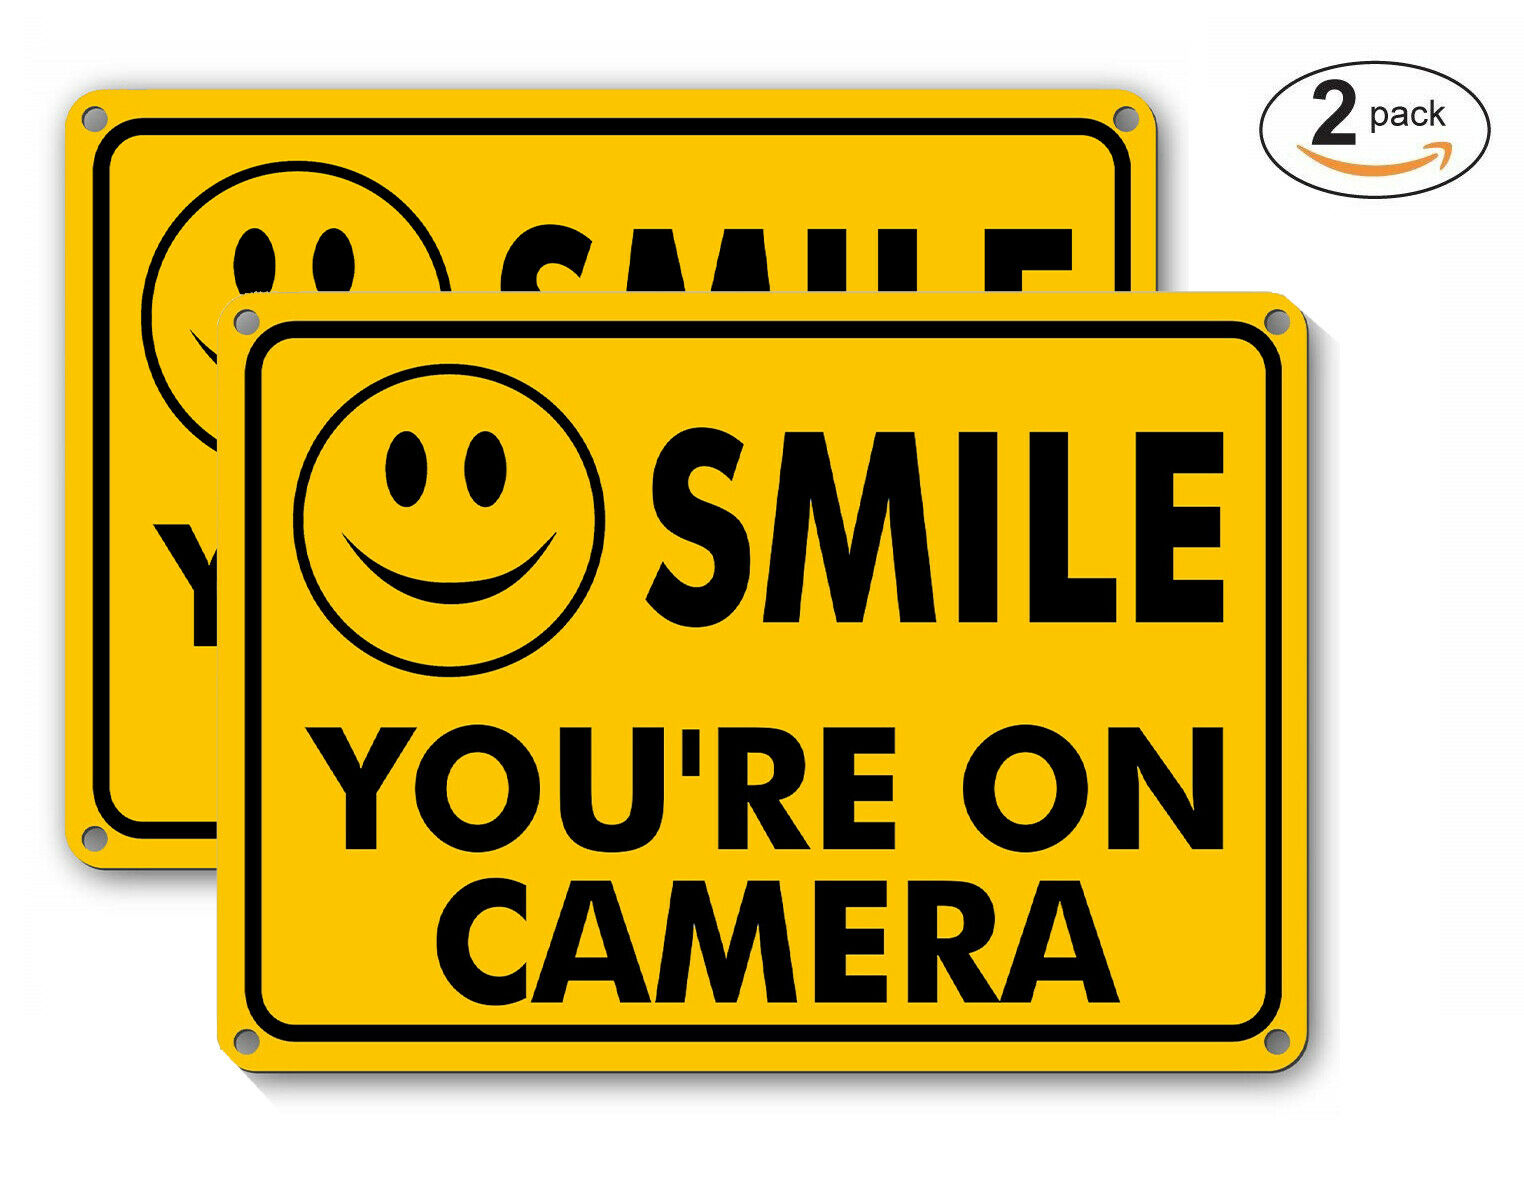 2 Smile You're On Camera Yellow Business Security Sign Cctv Video Surveillance